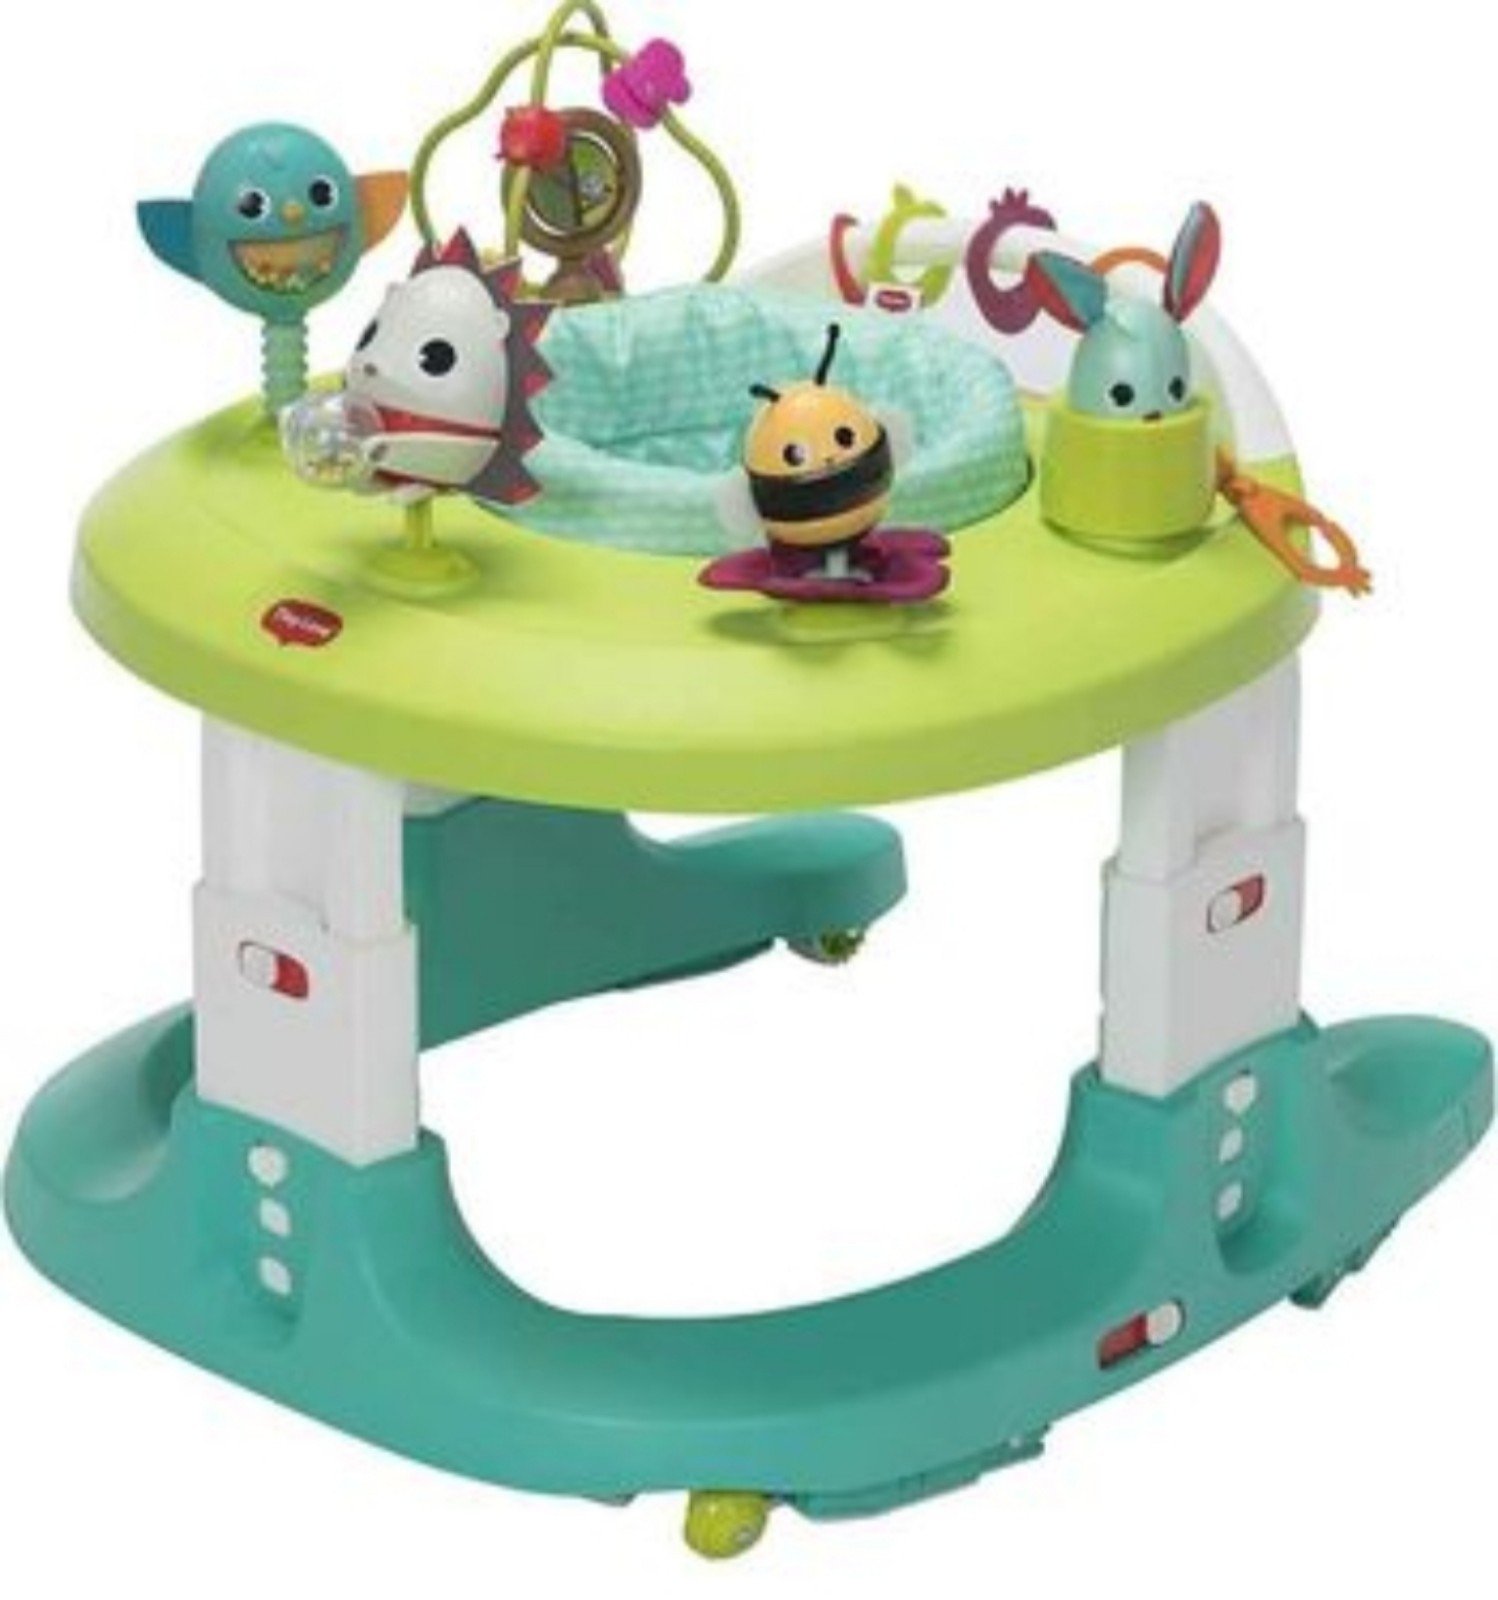 Tiny Love 4-in-1 Here I Grow Mobile Activity Center, Meadow Days GfxFcghBT